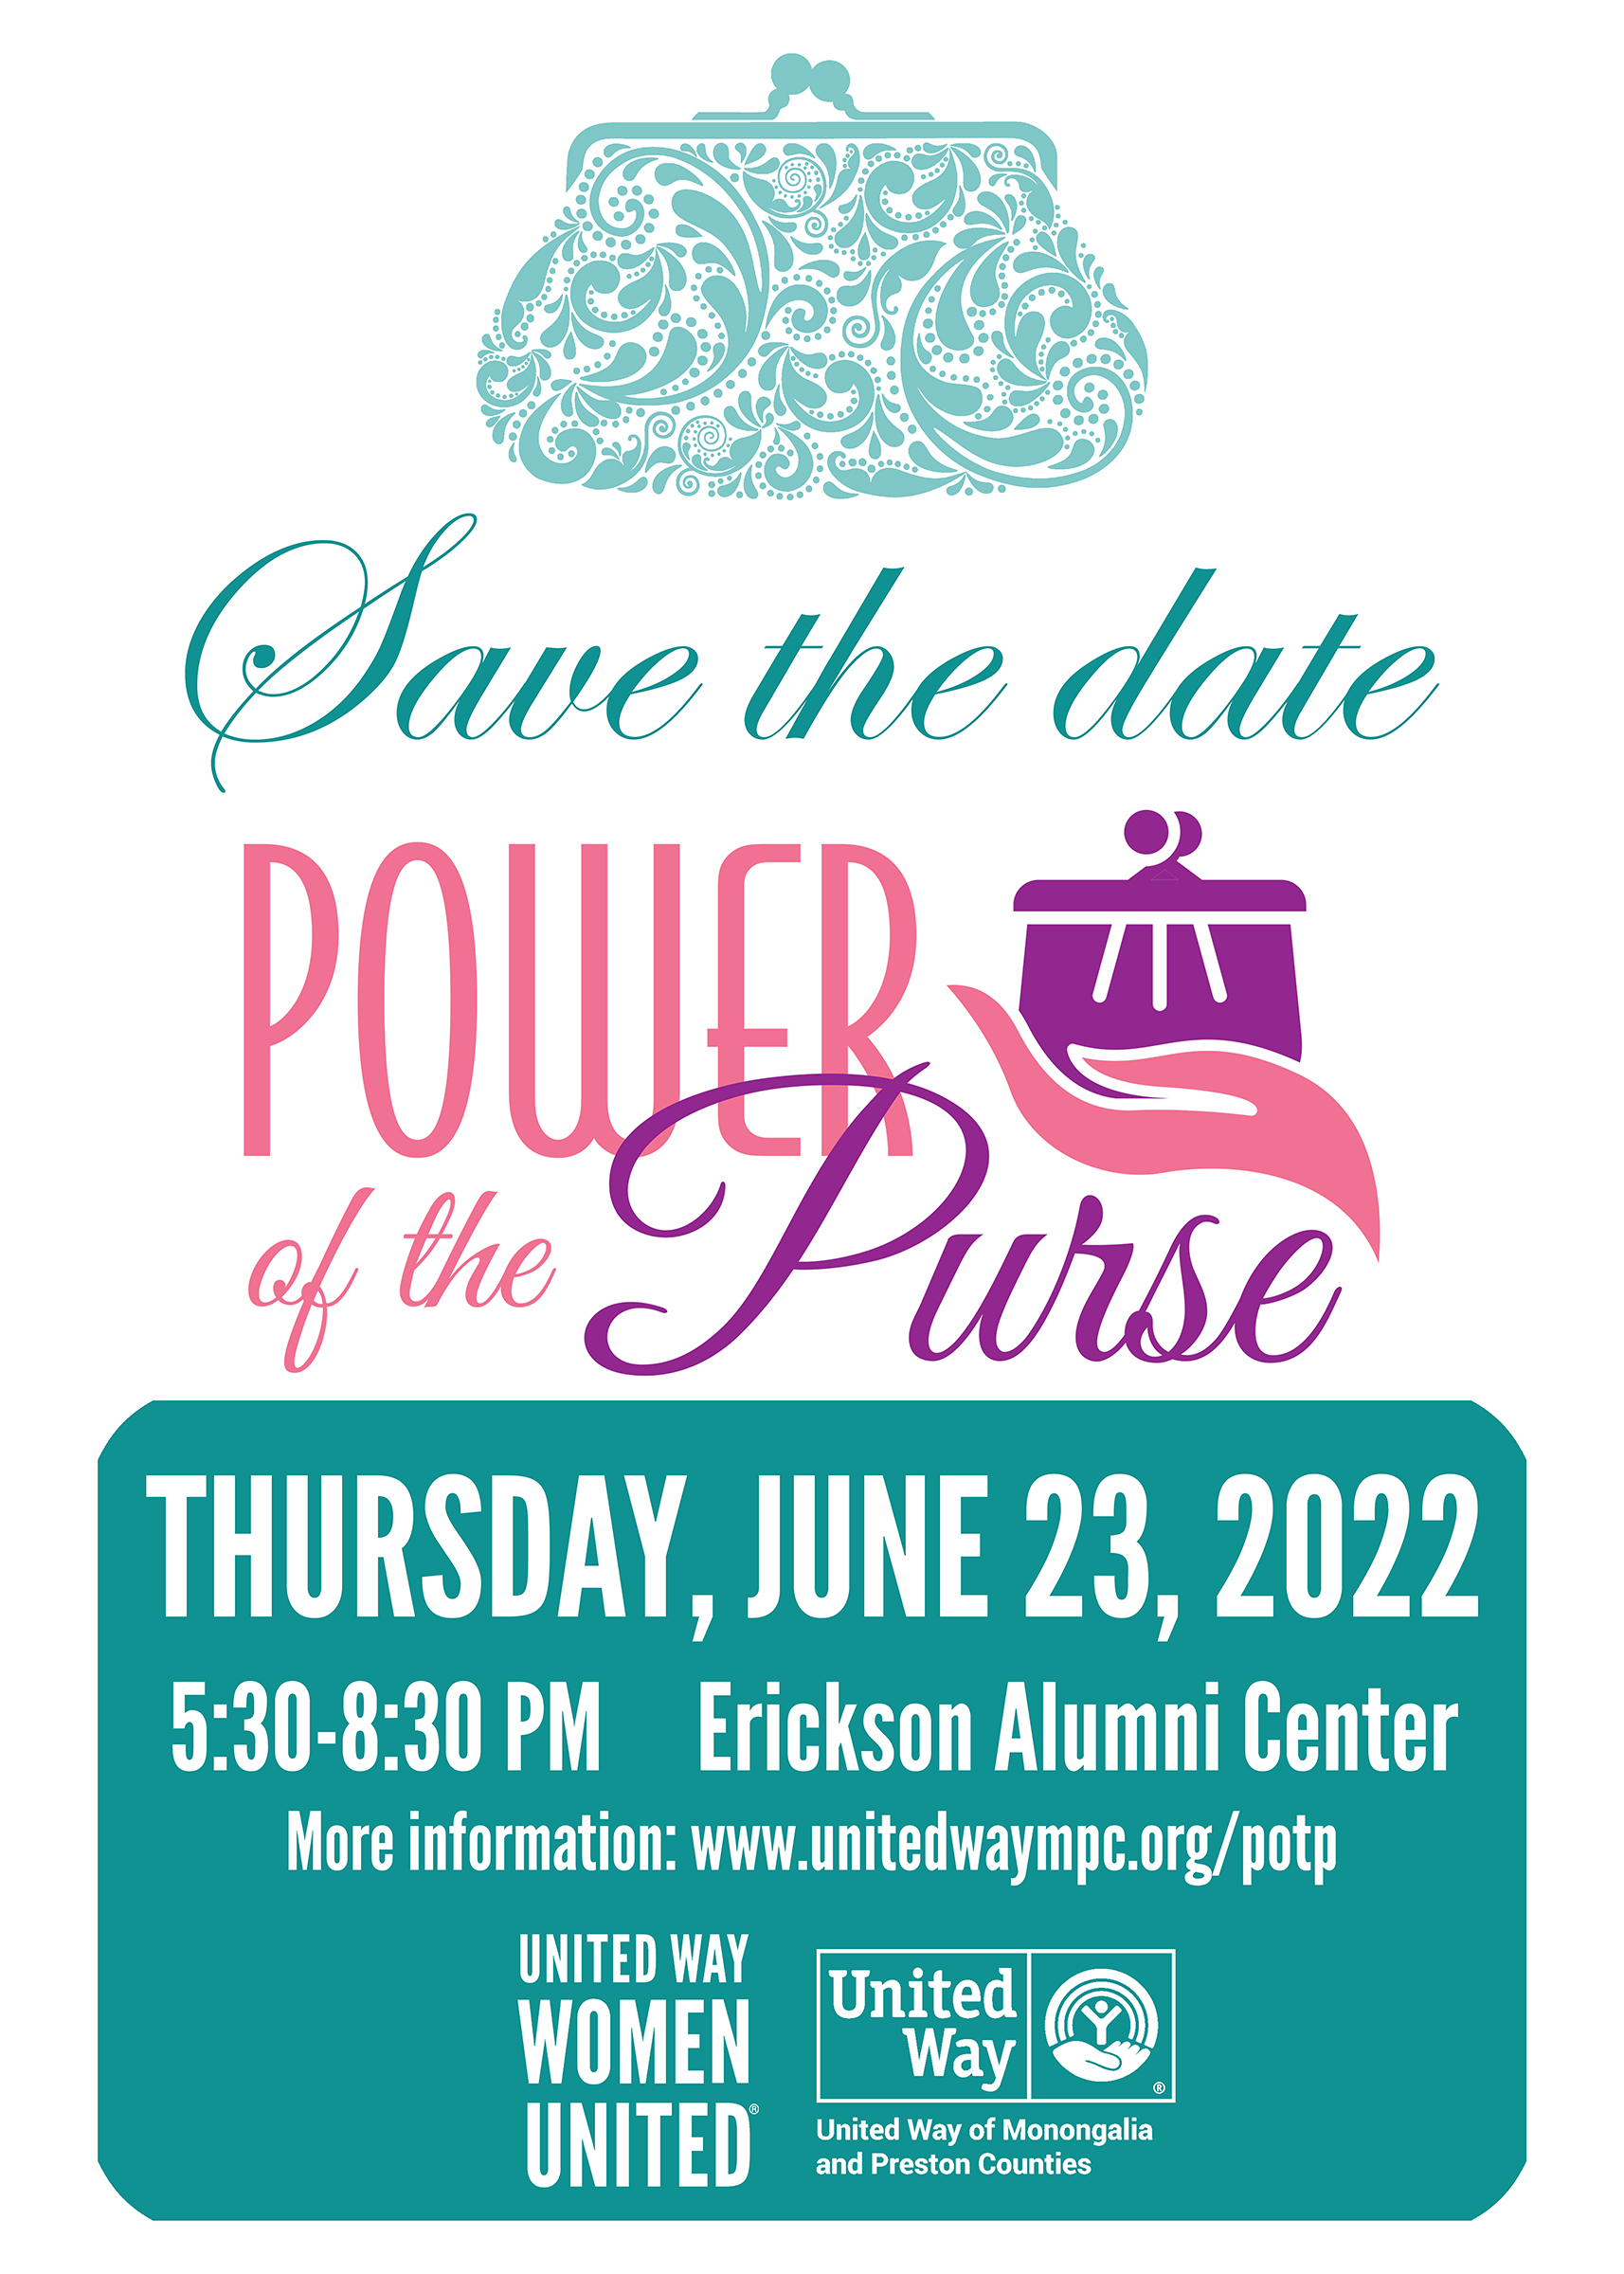 Power of the Purse is set for Thursday, June 23, 2022.